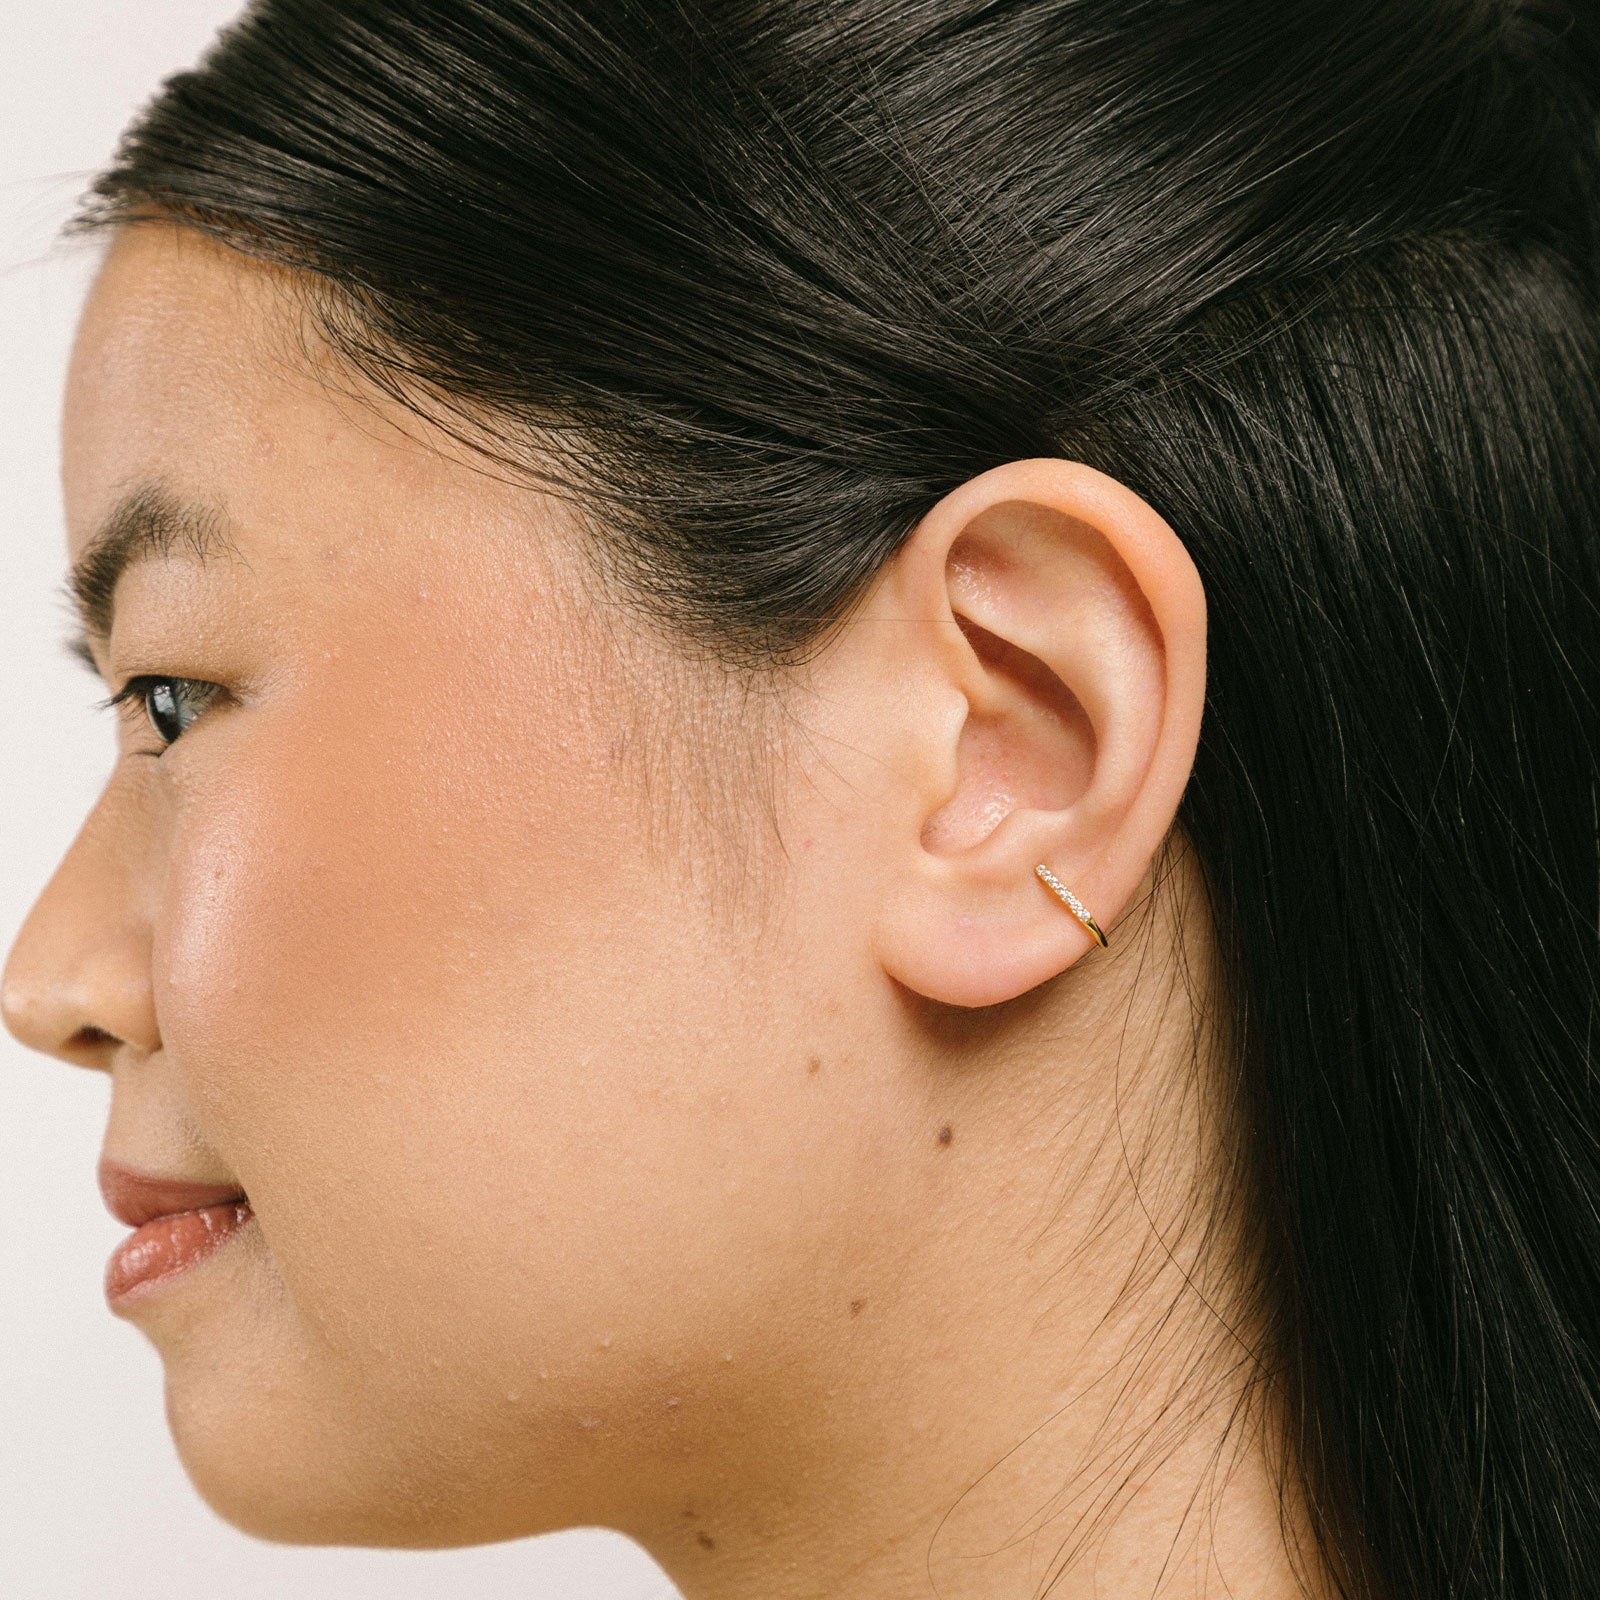 A model wearing the Thin Band Ear Cuff offers Medium Secure hold for up to 24 hours of comfortable wear. This ear cuff can be adjusted slightly once on the ear, and is ideal for all ear types, including thick/large ears, sensitive ears, small/thin ears, and stretched/healing ears. It is crafted from gold or silver plated copper alloy, with Cubic Zirconia for sparkle. This one-piece ear cuff also doubles as a faux nose piercing.